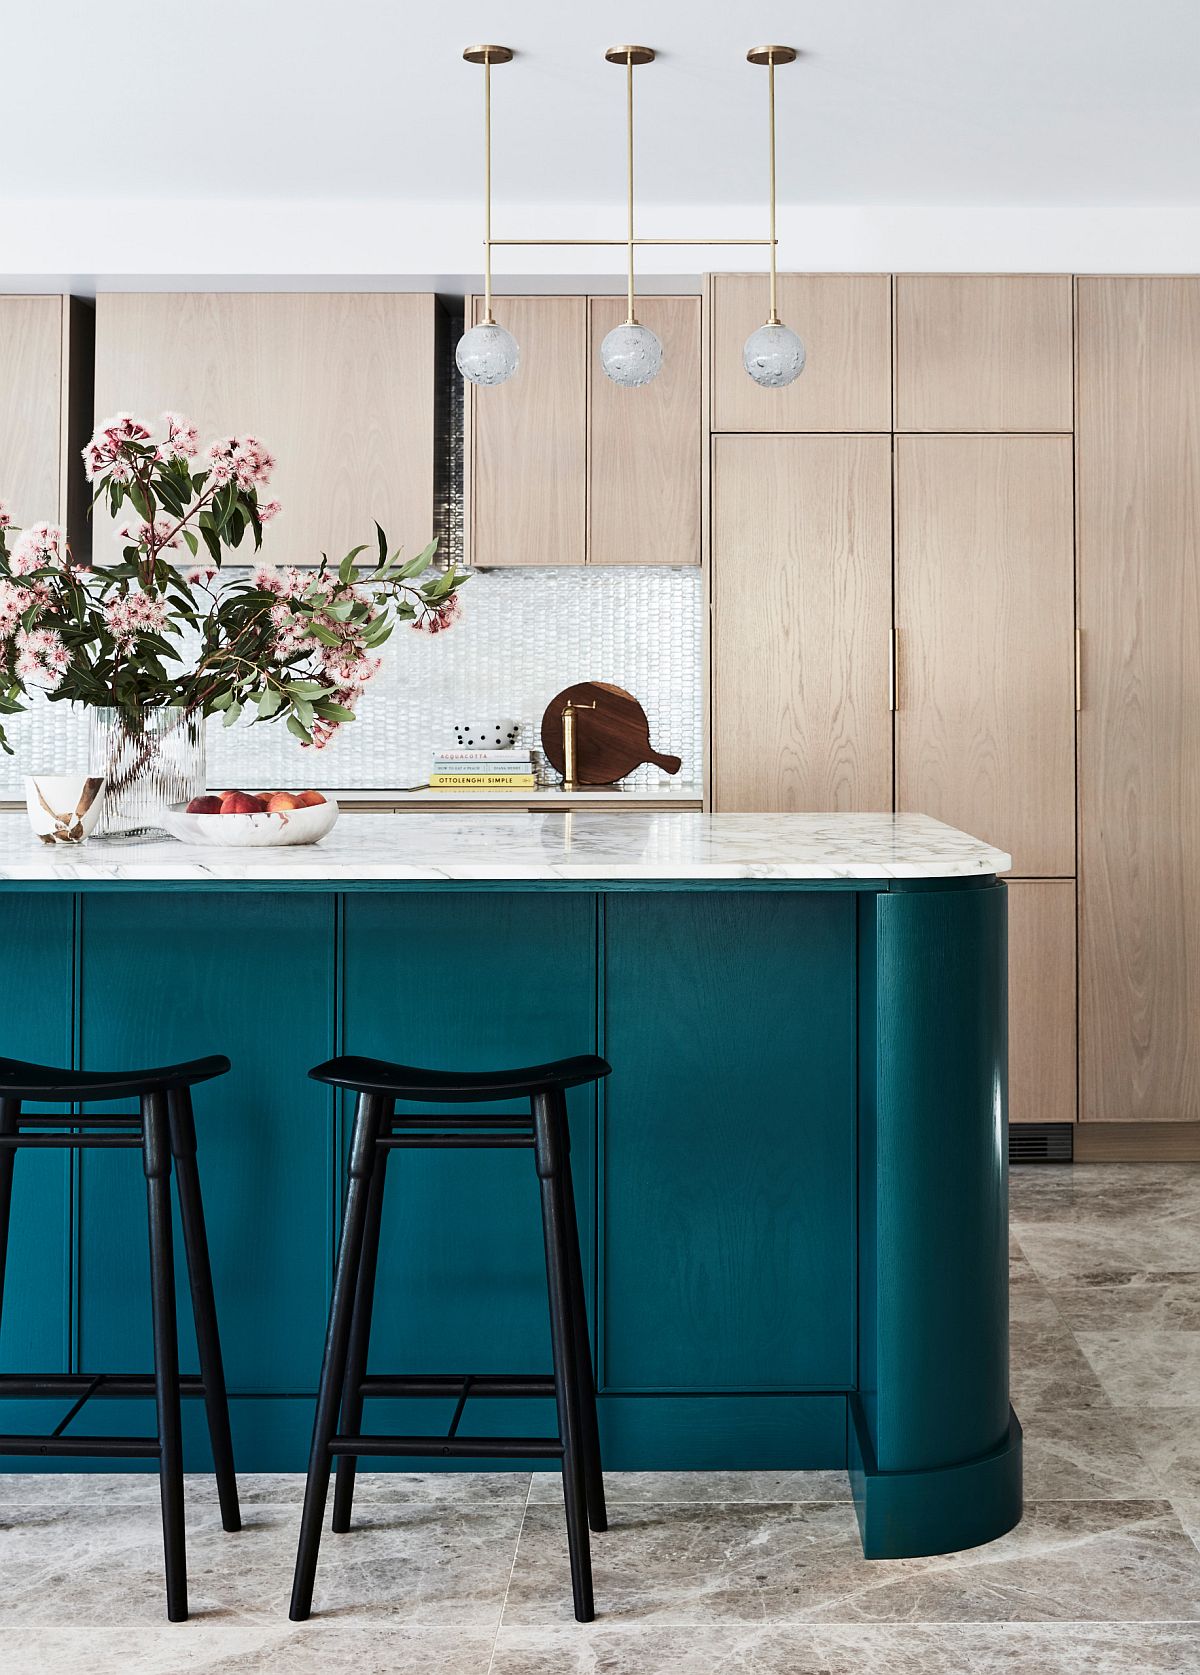 Give-your-kitchen-an-upgrade-with-striking-turquoise-kitchen-island-and-marble-countertops-30097